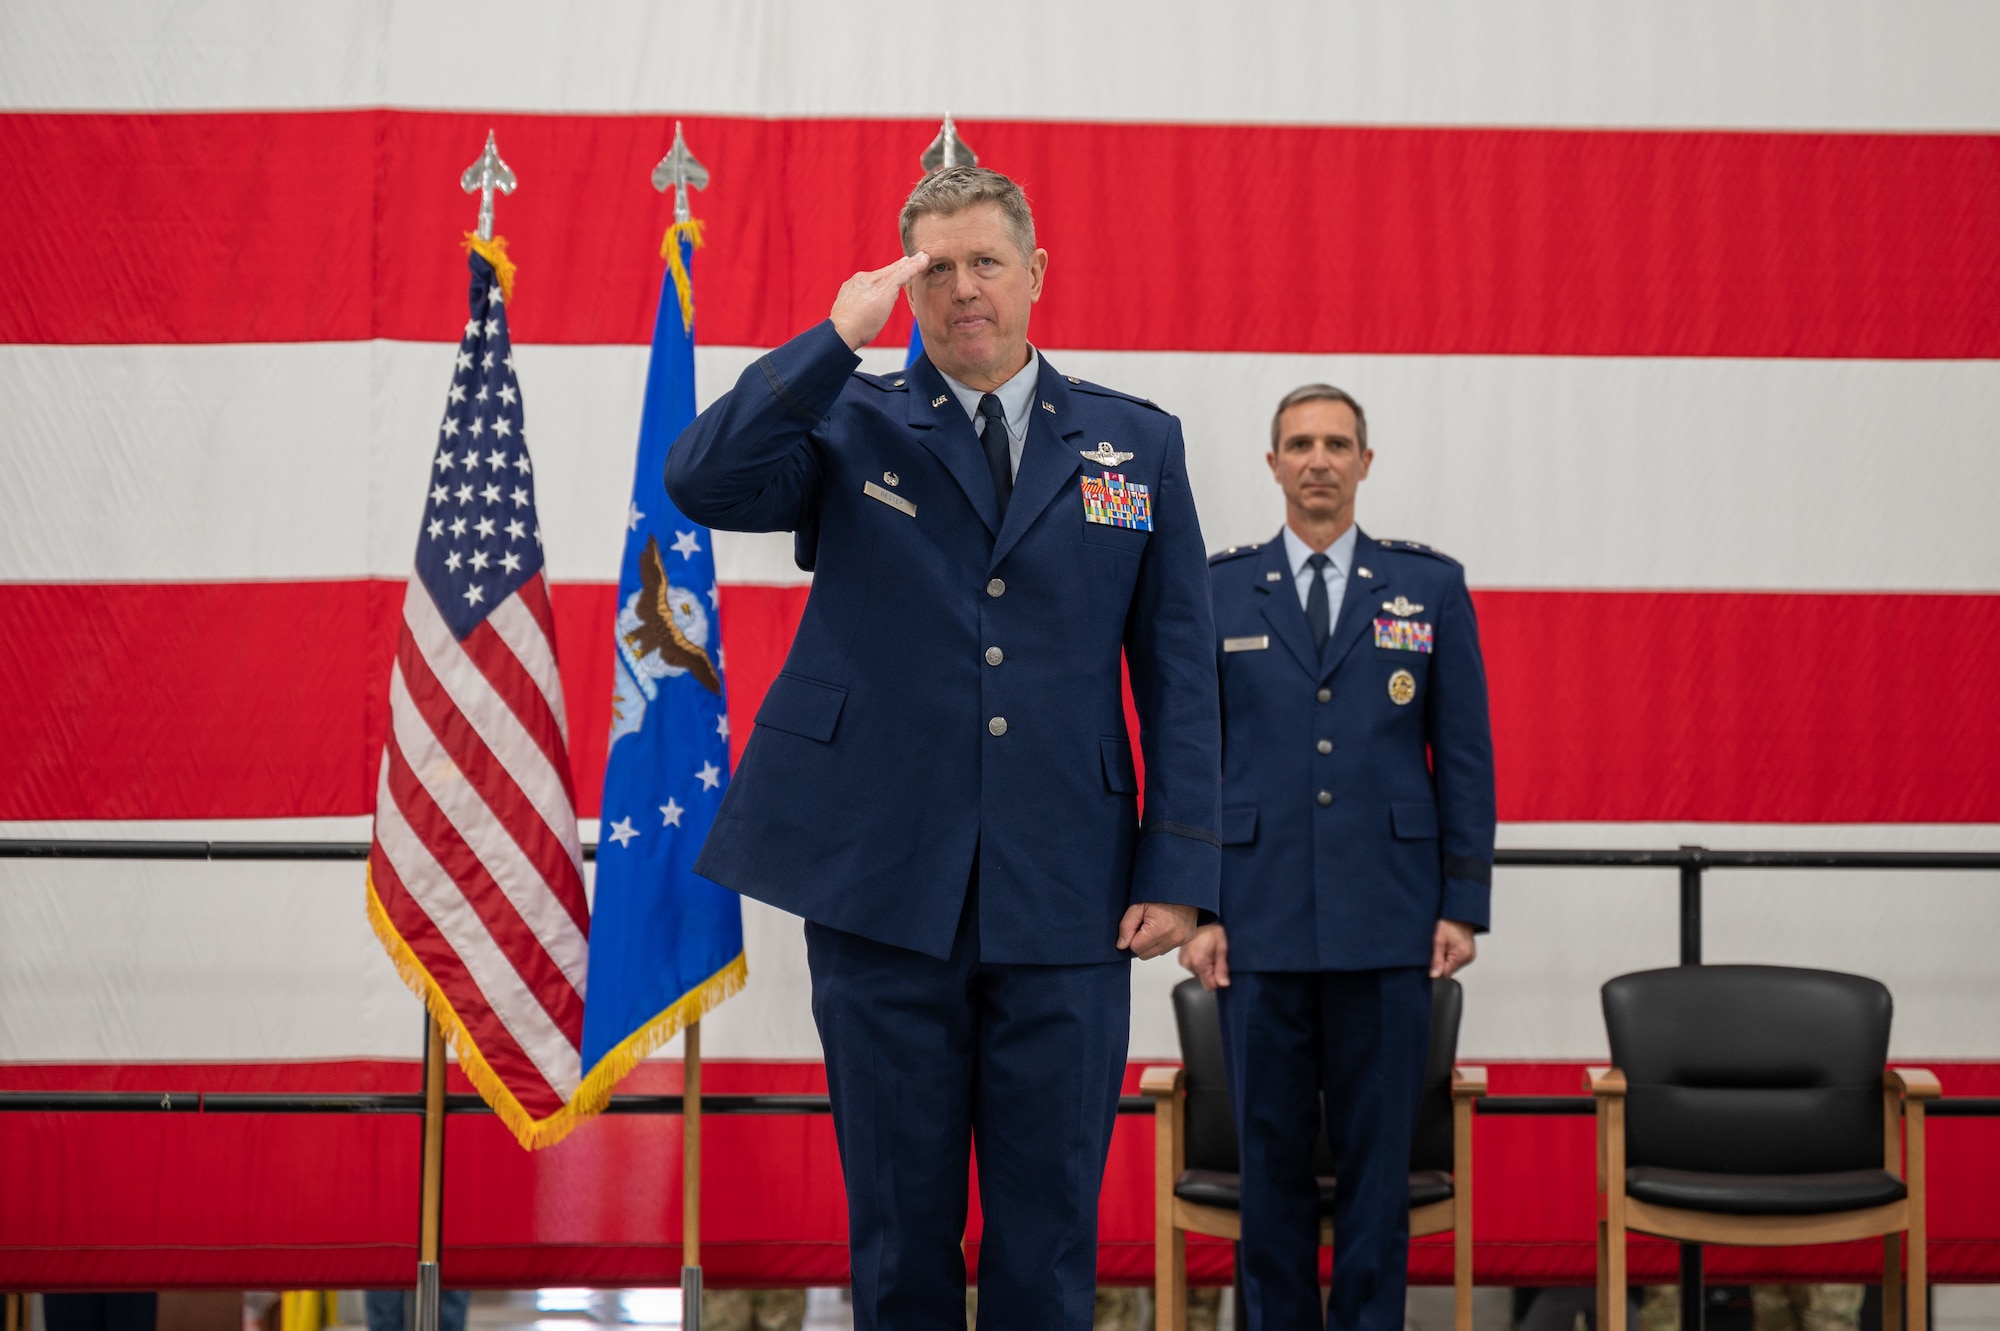 Two men in U.S. Air force service dress stand in front of a large American flag. The one in the foreground is rendering a salute.